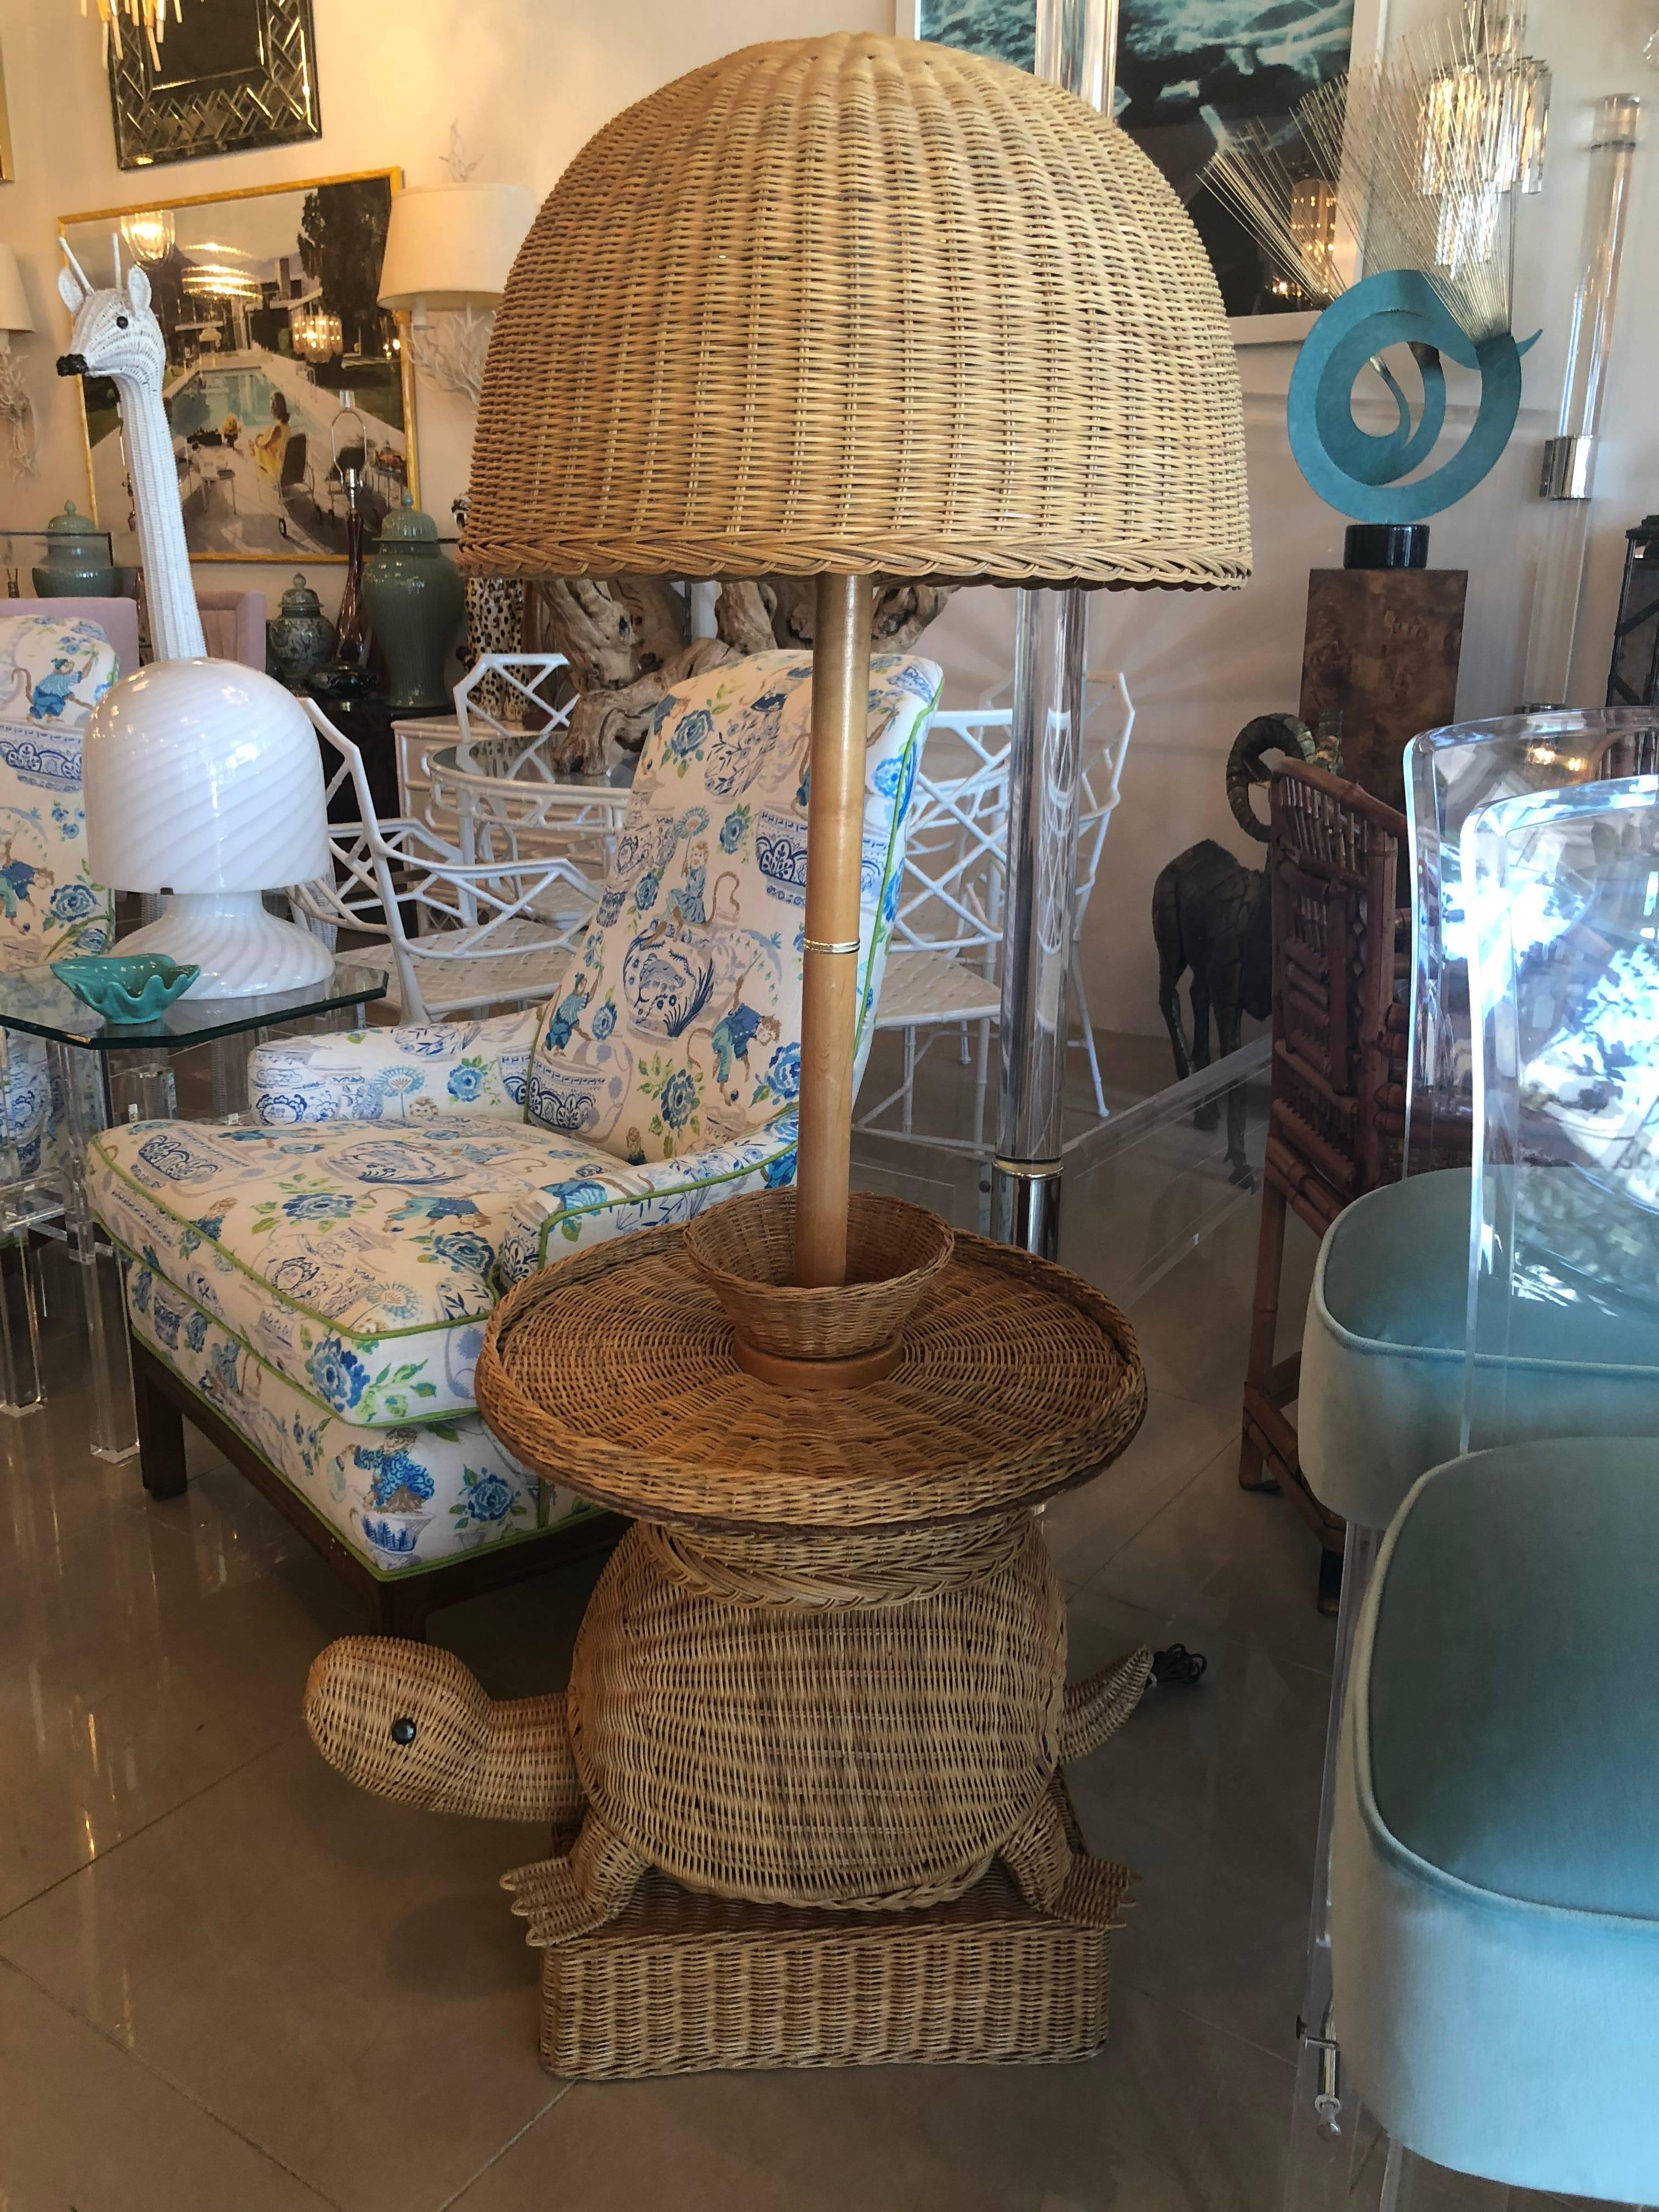 The perfect tropical, Palm Beach style Wicker turtle floor lamp. Doubles as an end or side table. Includes original Wicker lampshade. I just adore this!